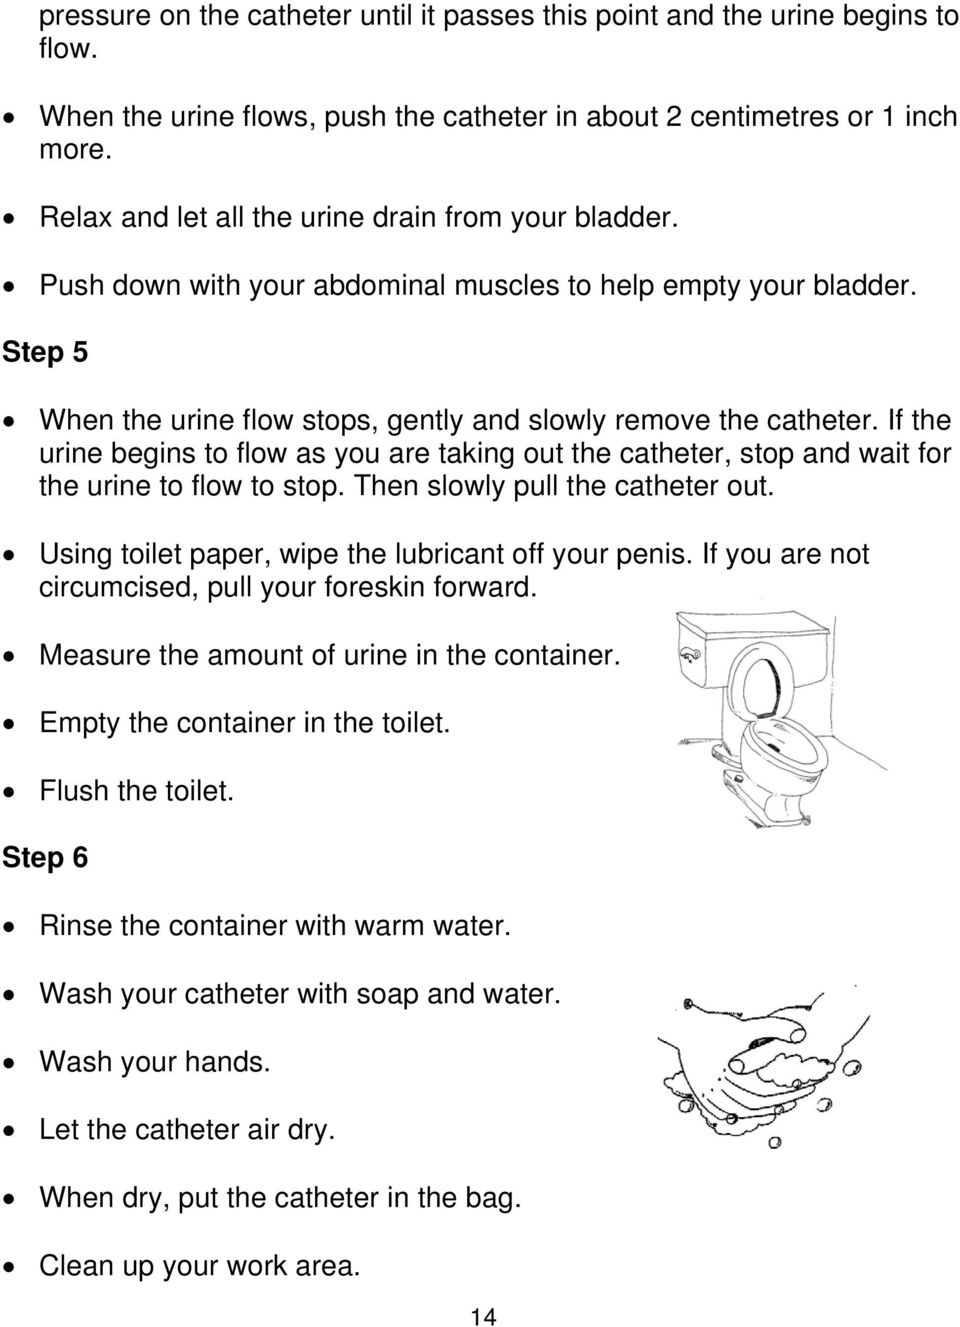 If the urine begins to flow as you are taking out the catheter, stop and wait for the urine to flow to stop. Then slowly pull the catheter out. Using toilet paper, wipe the lubricant off your penis.